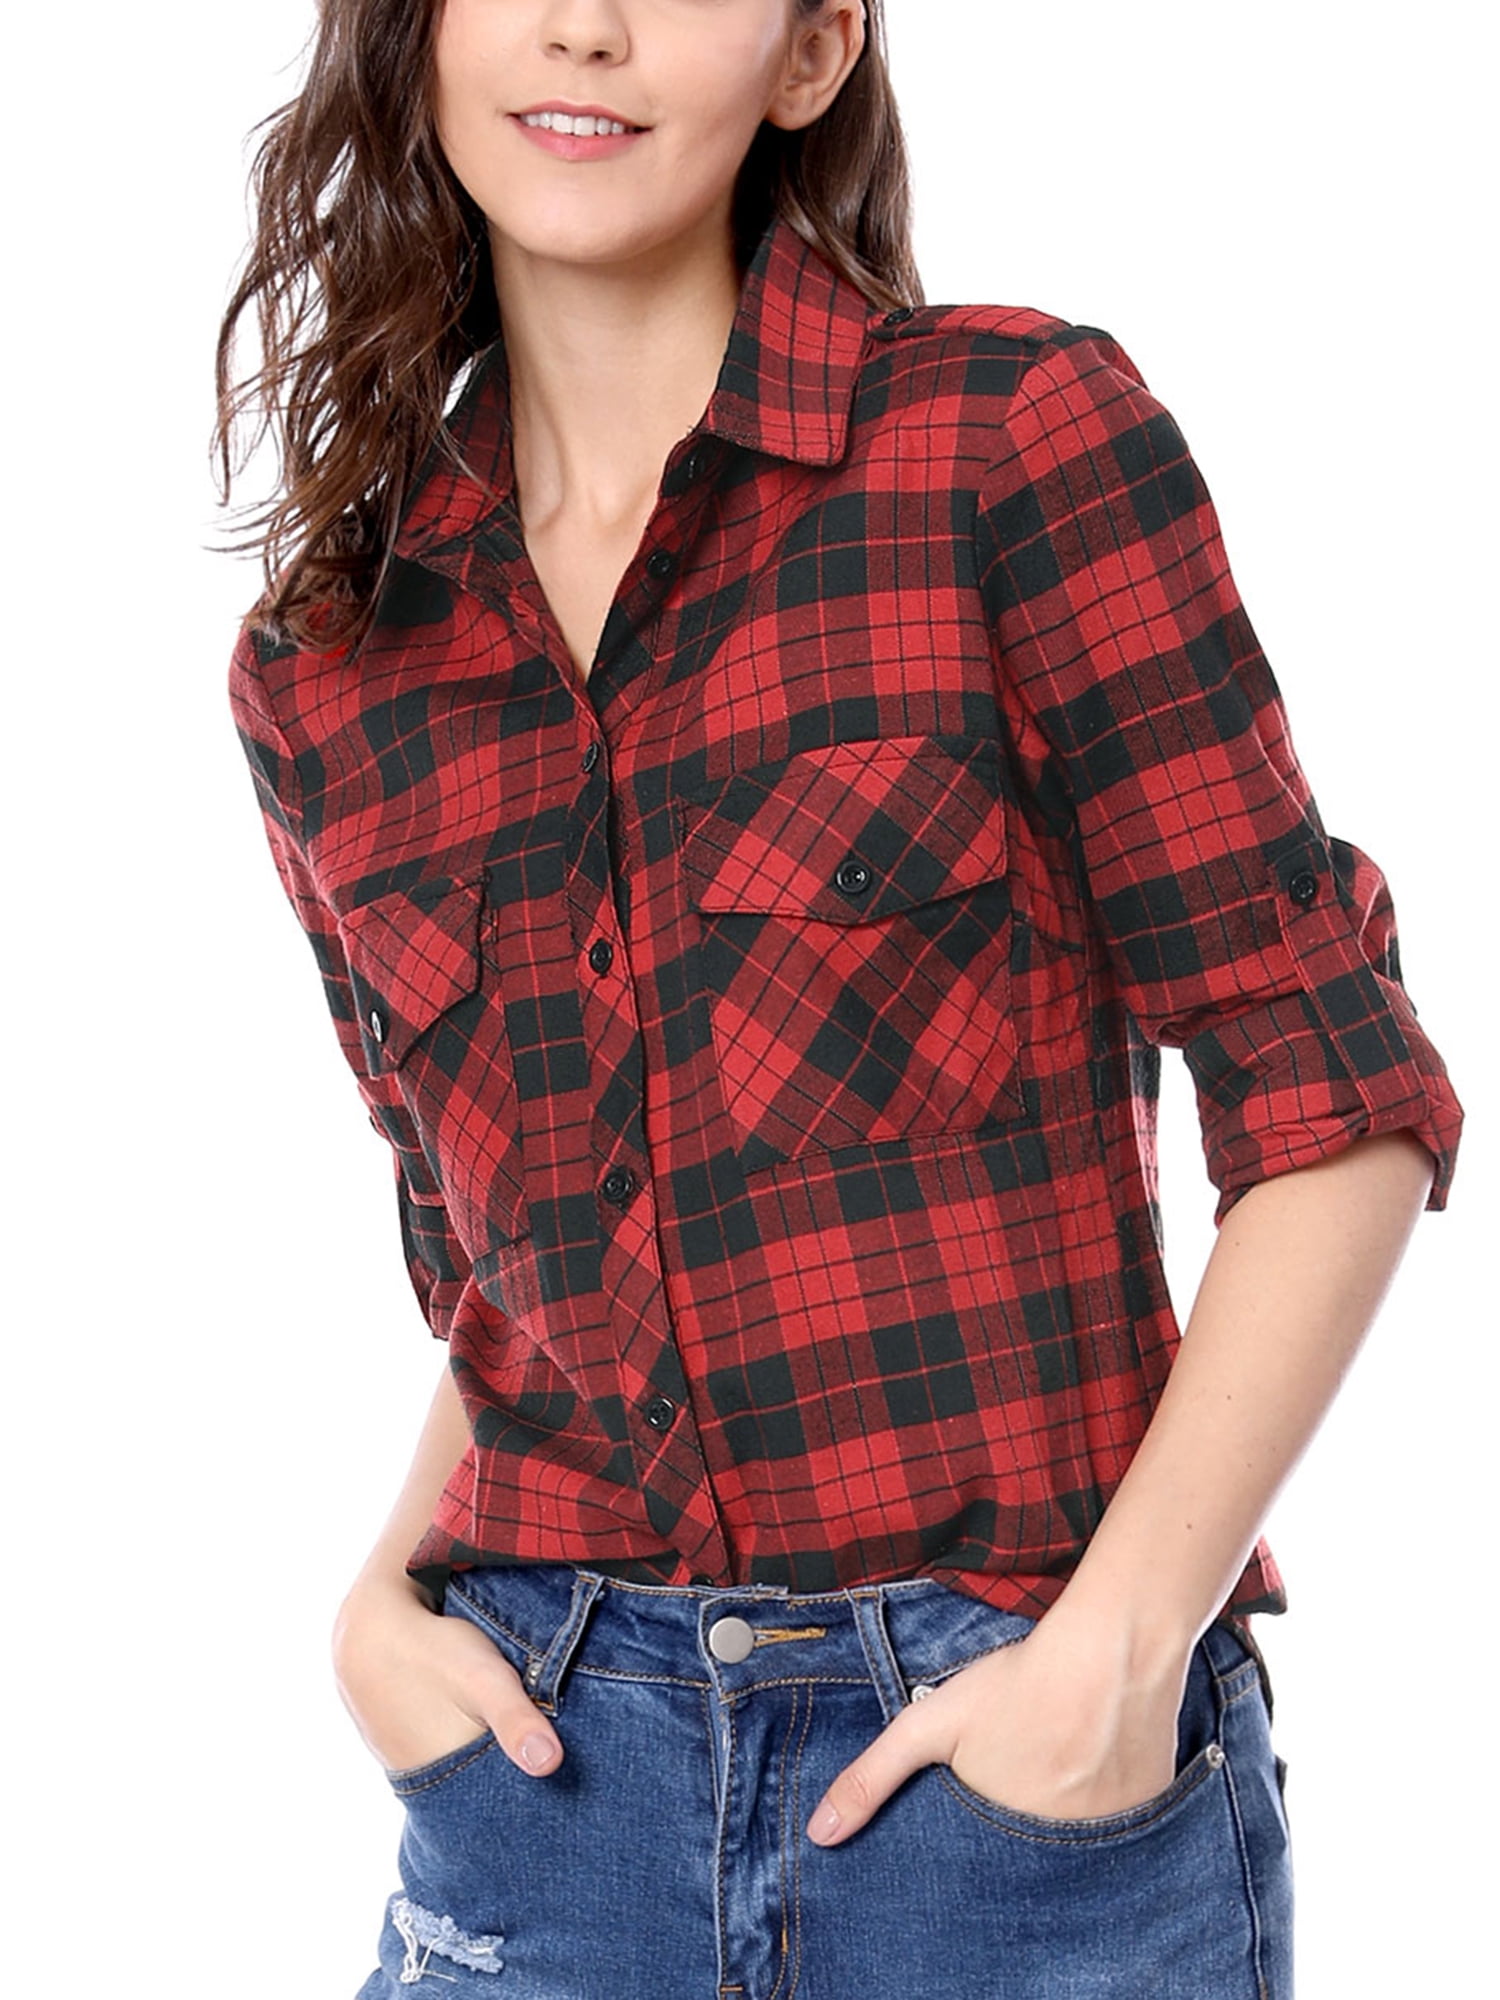 Unique Bargains - Women Checks Roll Up Sleeves Flap Pockets Flannel ...